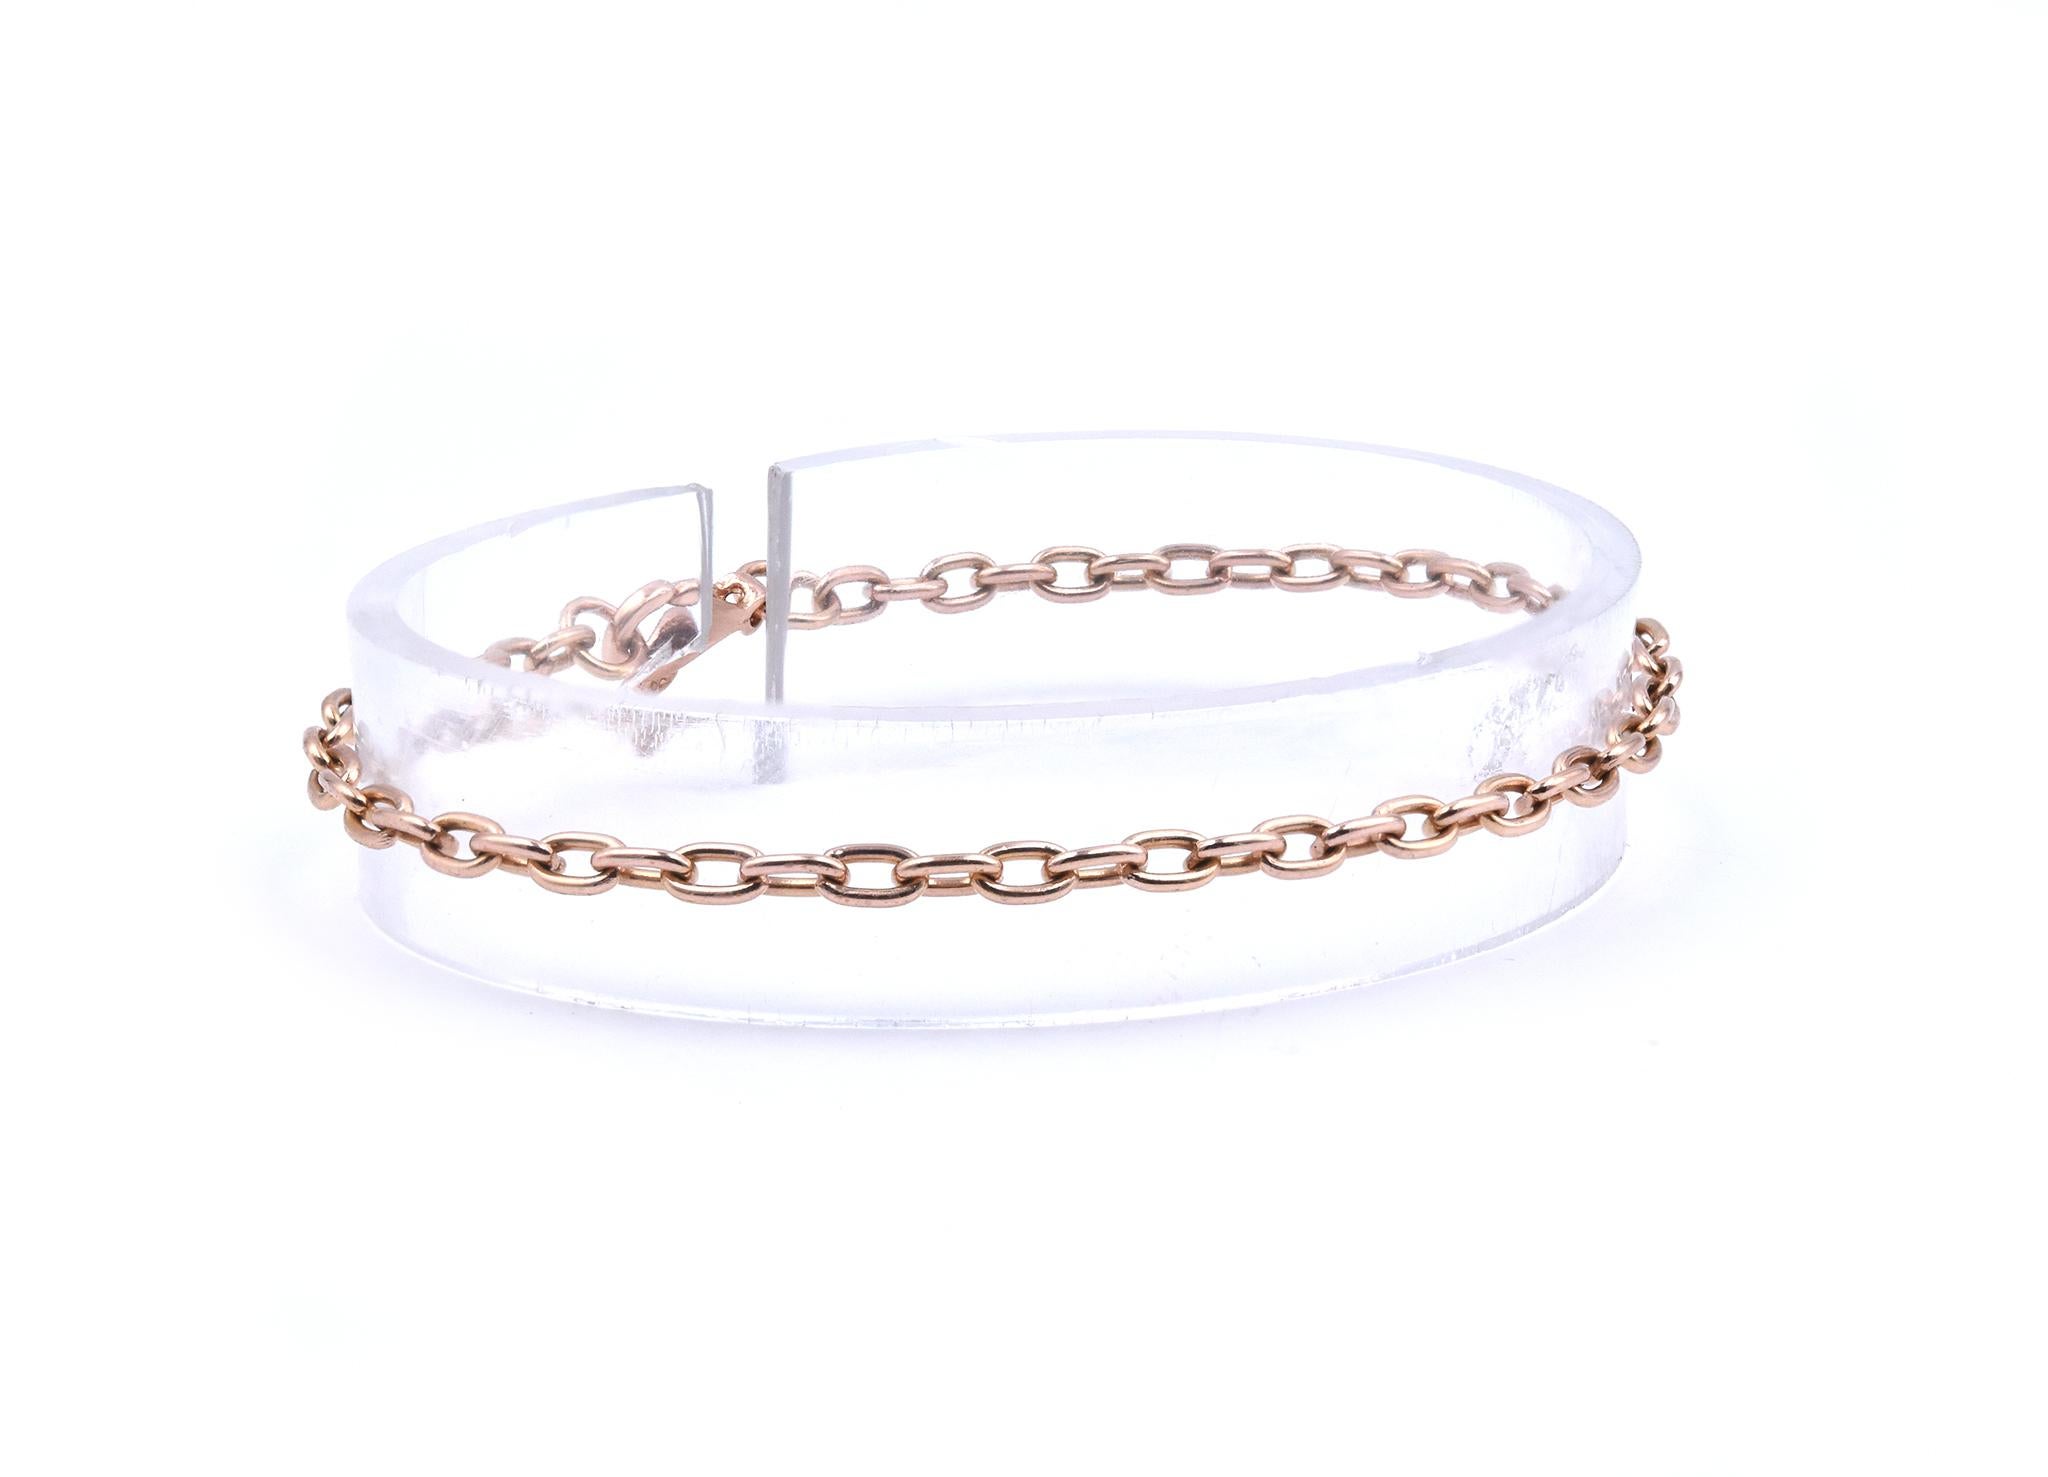 Designer: custom
Material: 14k rose gold
Dimensions: the bracelet will fit up to a 7-inch wrist
Weight: 3.82 grams
